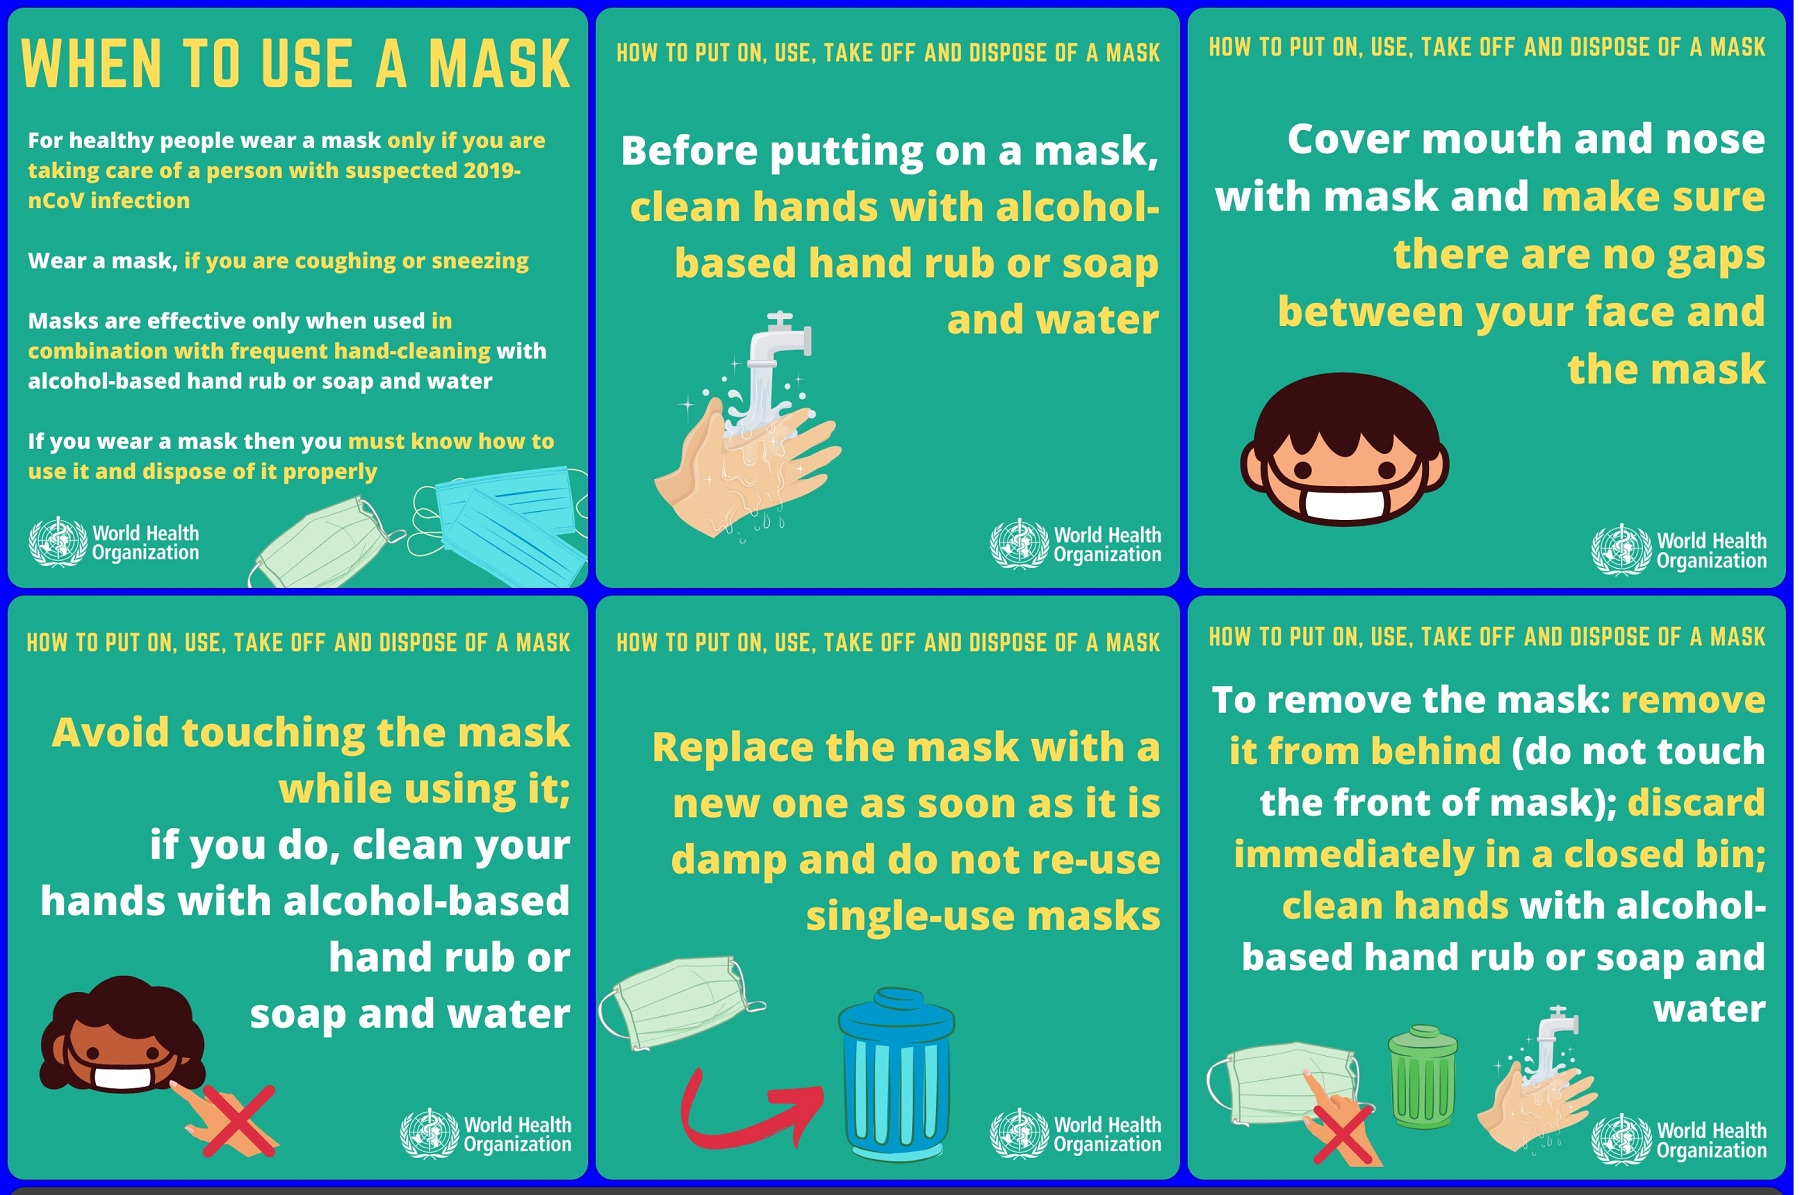 COVID-19: WHO's advice for public - When and how to use masks